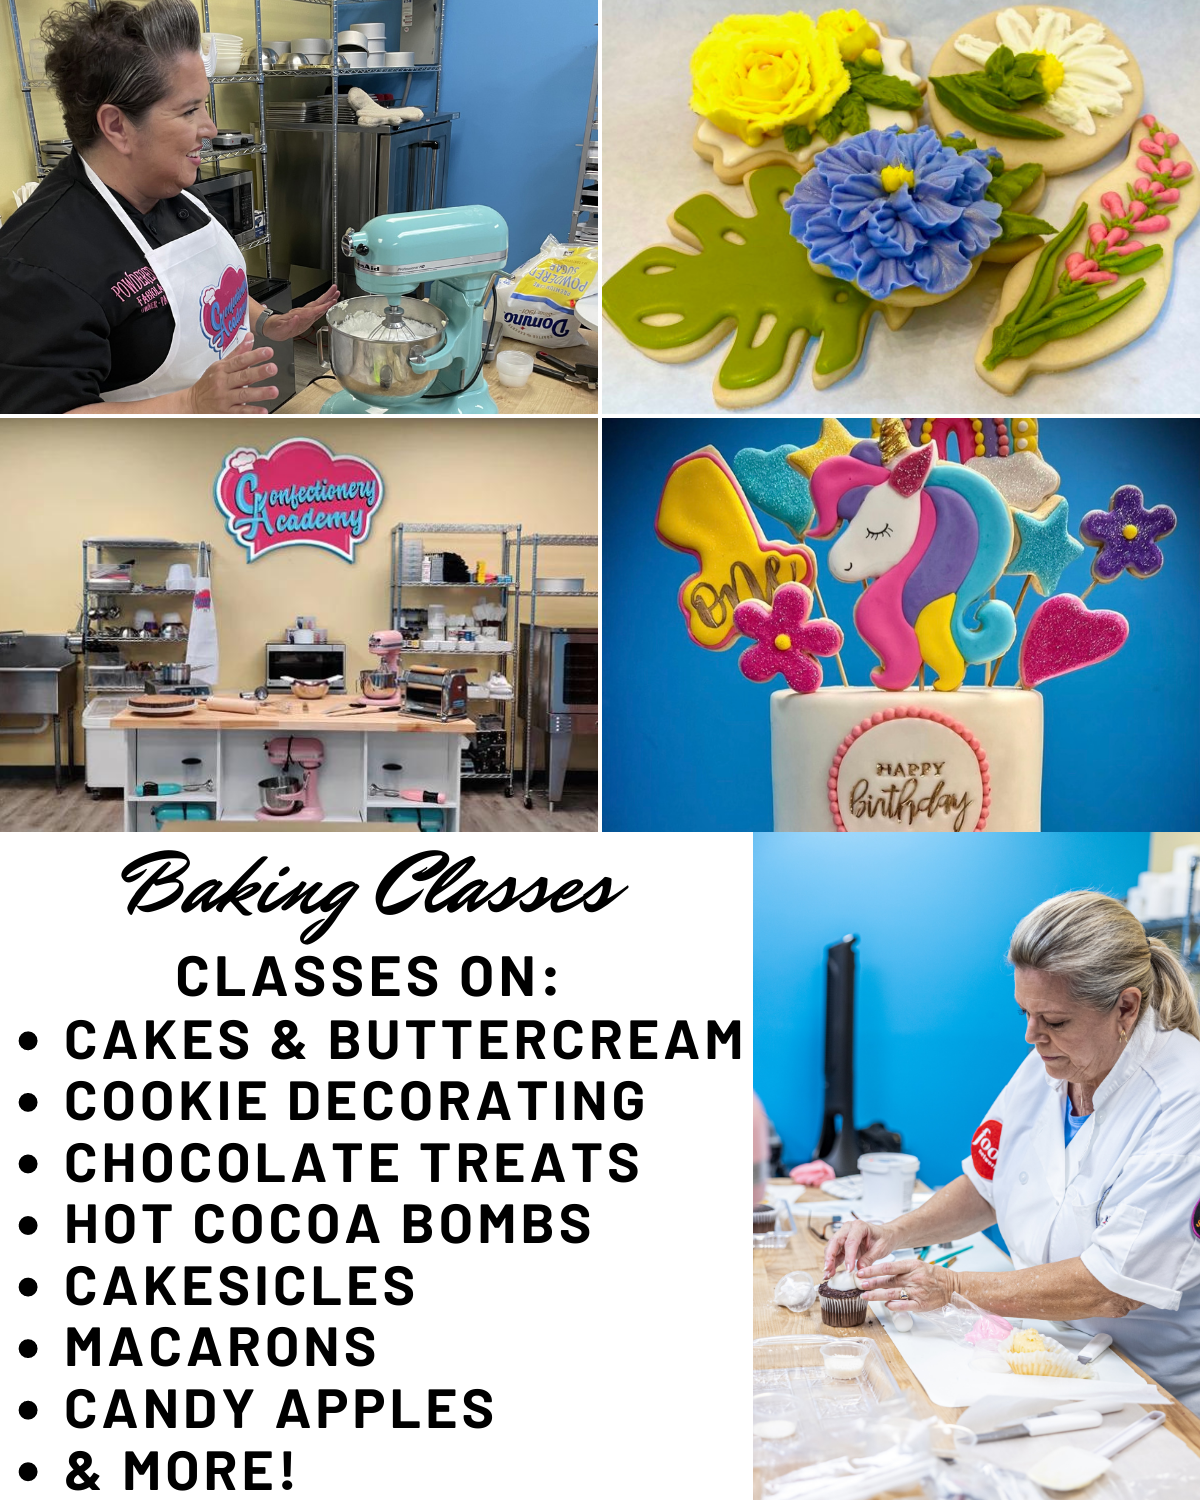 Cake Supplies On Sale - Cake Decorating, Bakery, Pastry and Candy Supply  Store